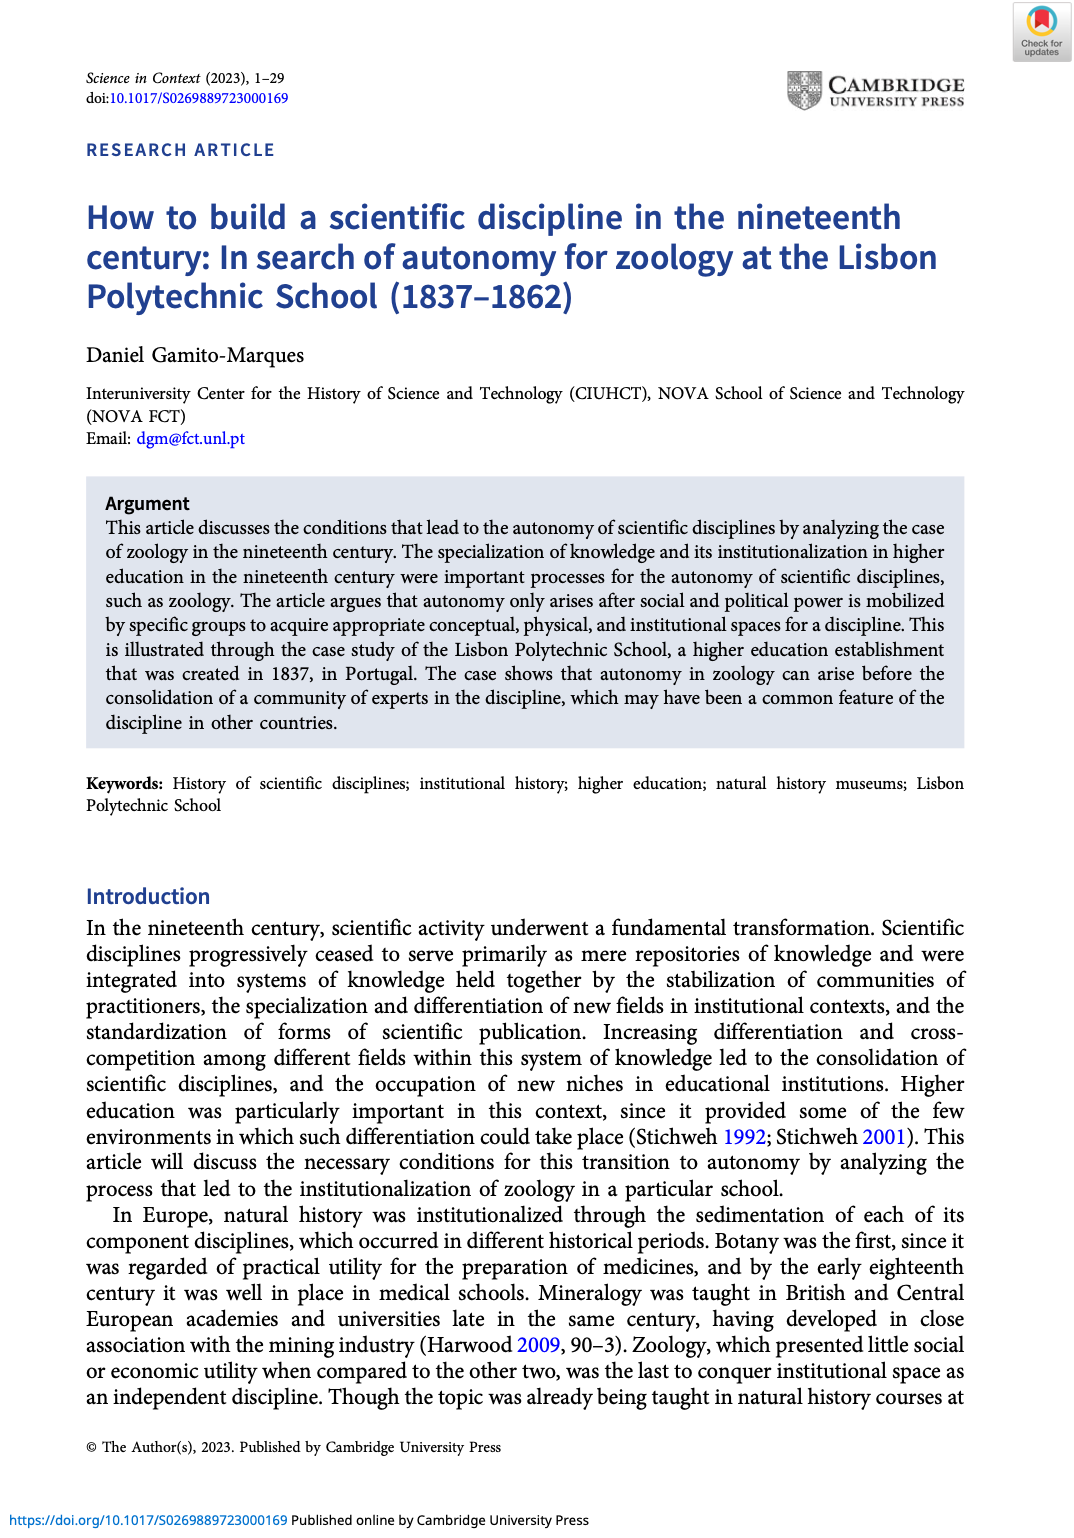 How to build a scientific discipline in the nineteenth century: In search of autonomy for zoology at the Lisbon Polytechnic School (1837–1862), Capa